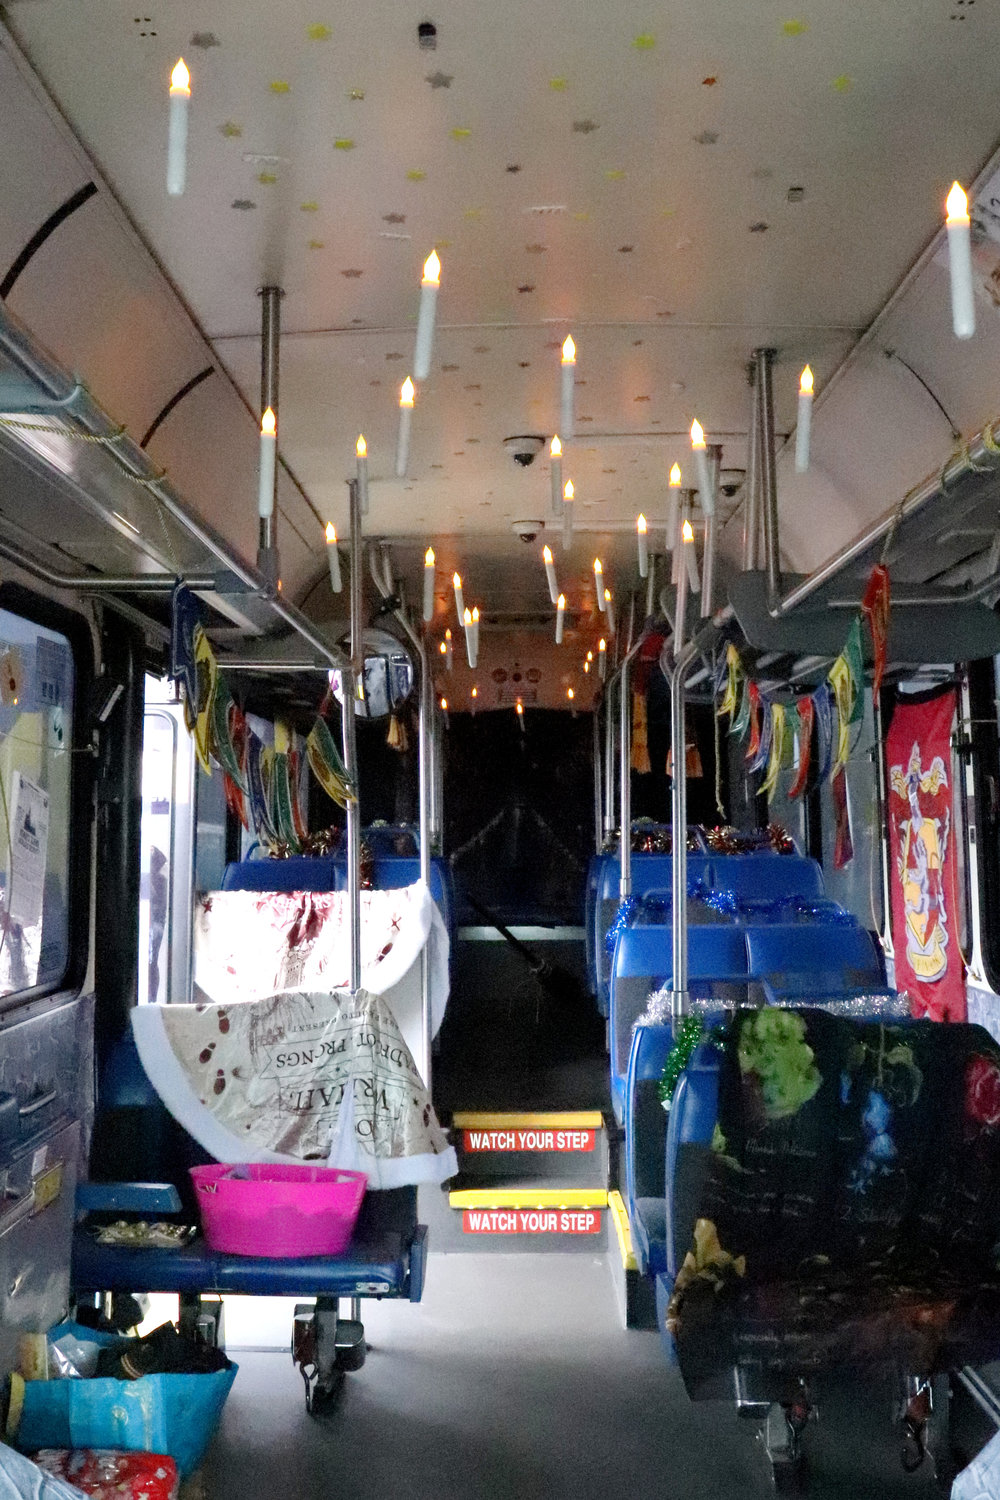 Twin Transit decorated several of its buses for Trick or Treat Transit on Monday. Trick-or-treaters were invited to board the bus at the Lewis County Mall for free transportation between trick or treat spots in downtown Centralia, downtown Chehalis and the Twin City Town Center.